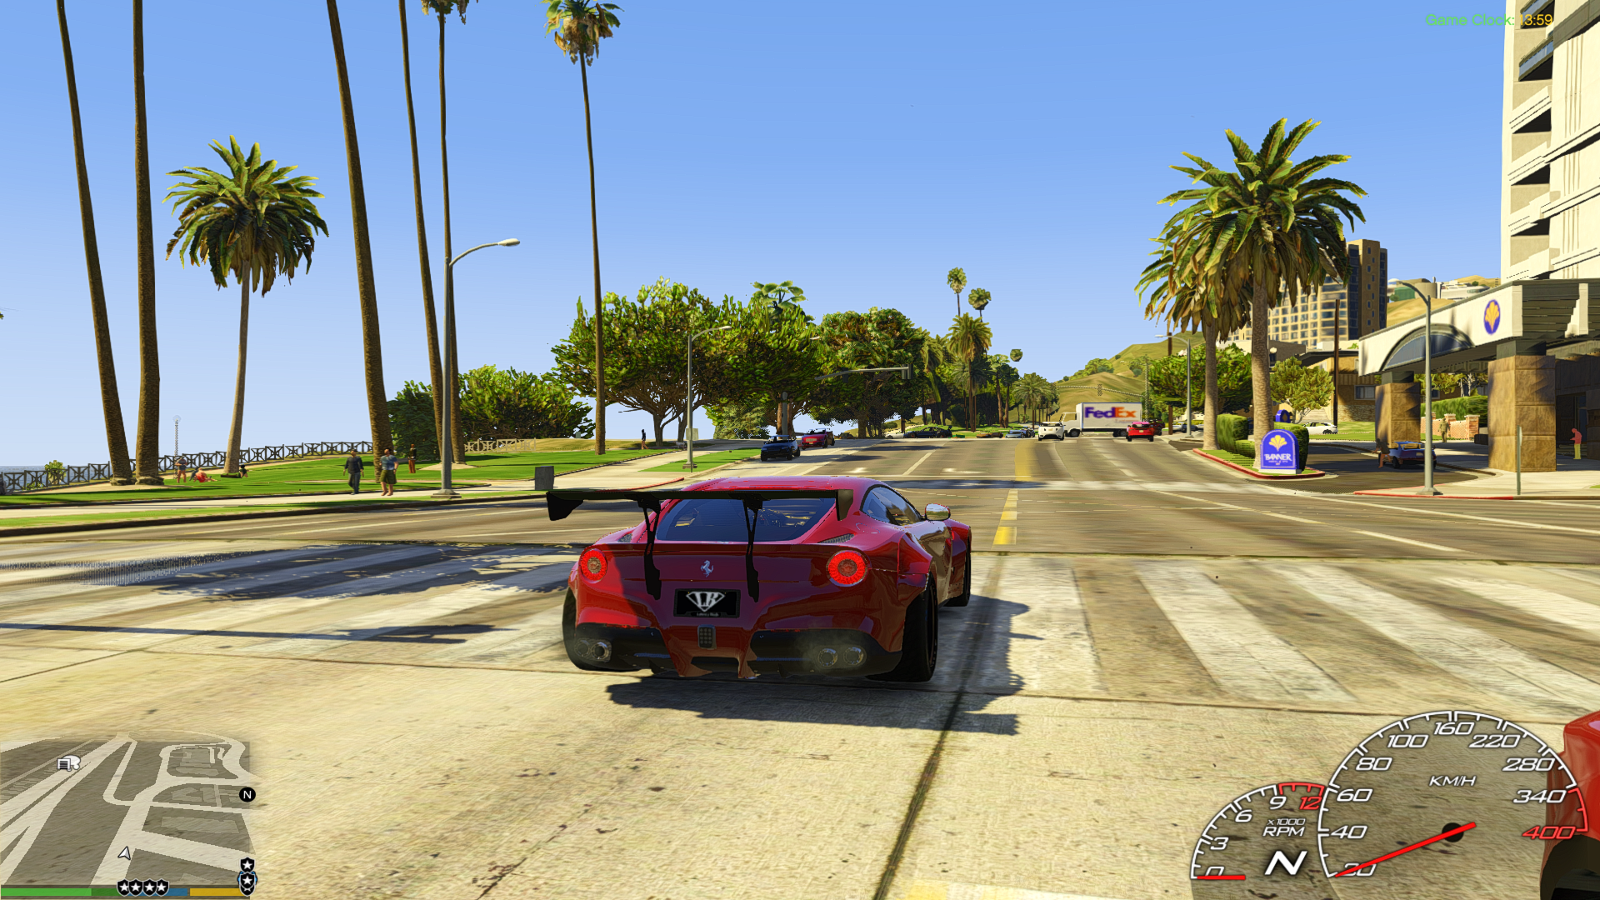 How To Install Graphics Mod In GTA 5 For Low End PC 